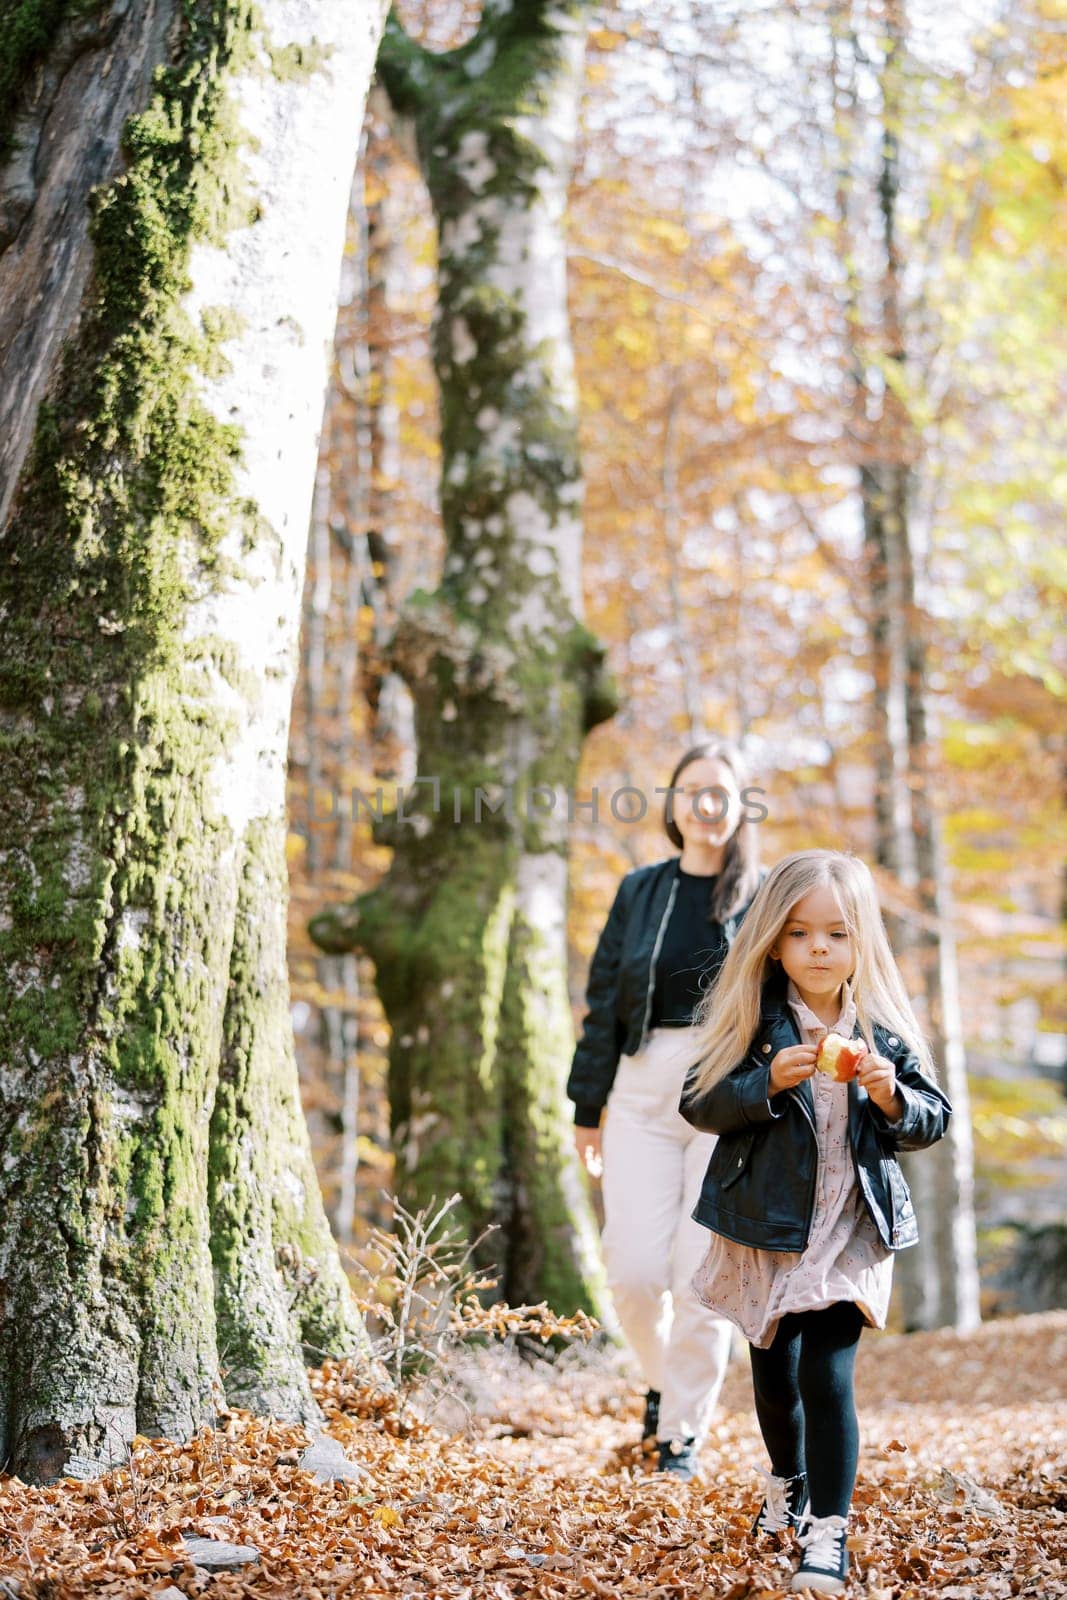 Mom follows a little girl gnawing an apple in the autumn forest. High quality photo